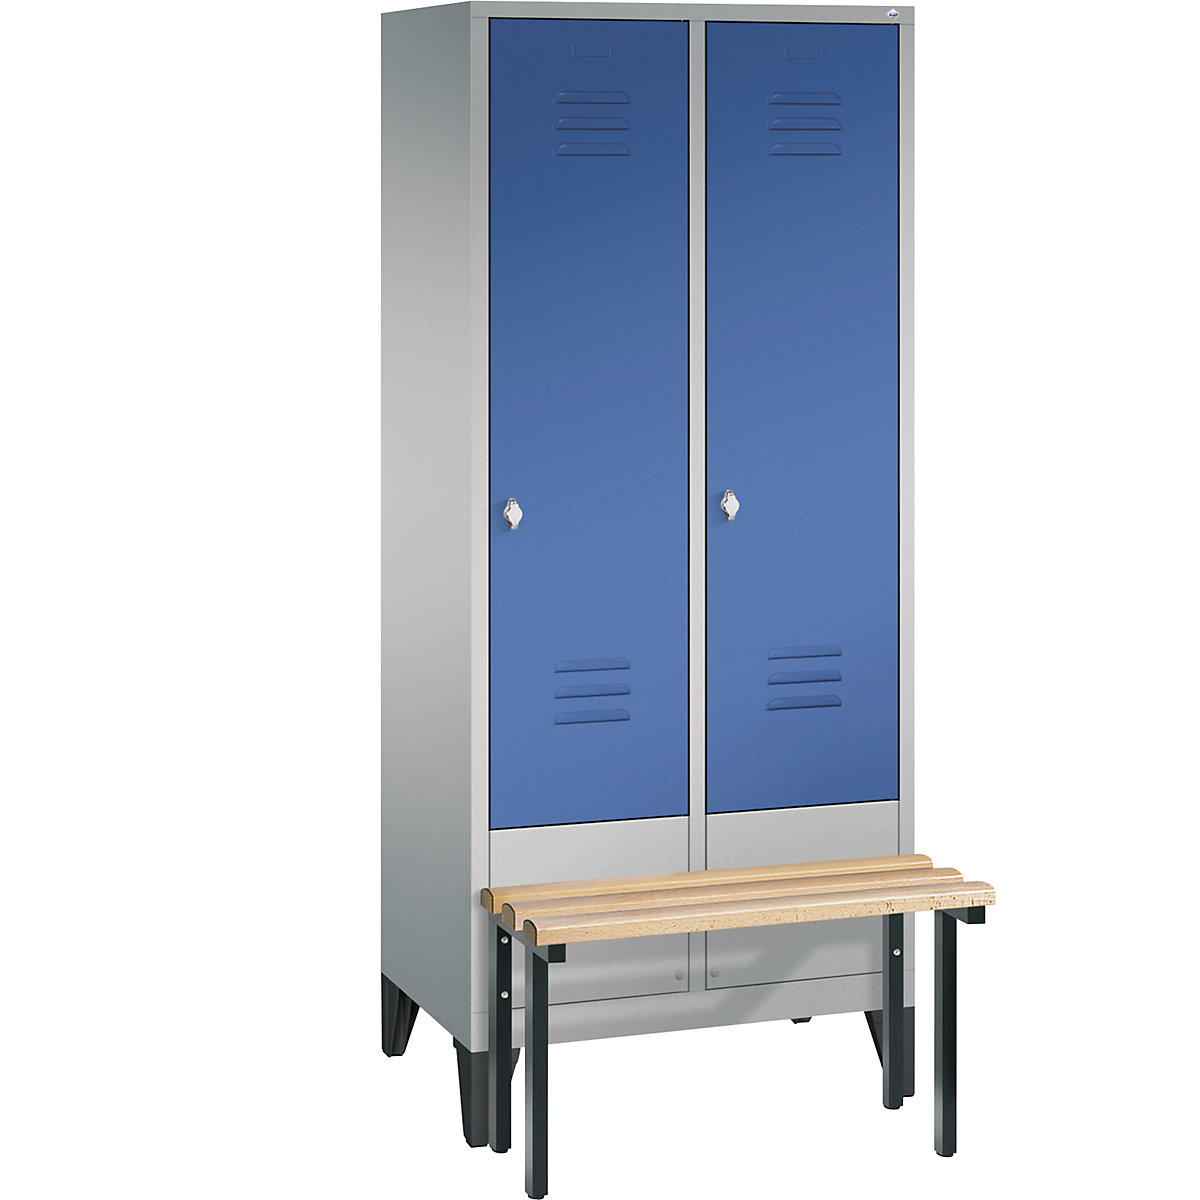 CLASSIC cloakroom locker with bench mounted in front – C+P, 2 compartments, compartment width 400 mm, white aluminium / gentian blue-13